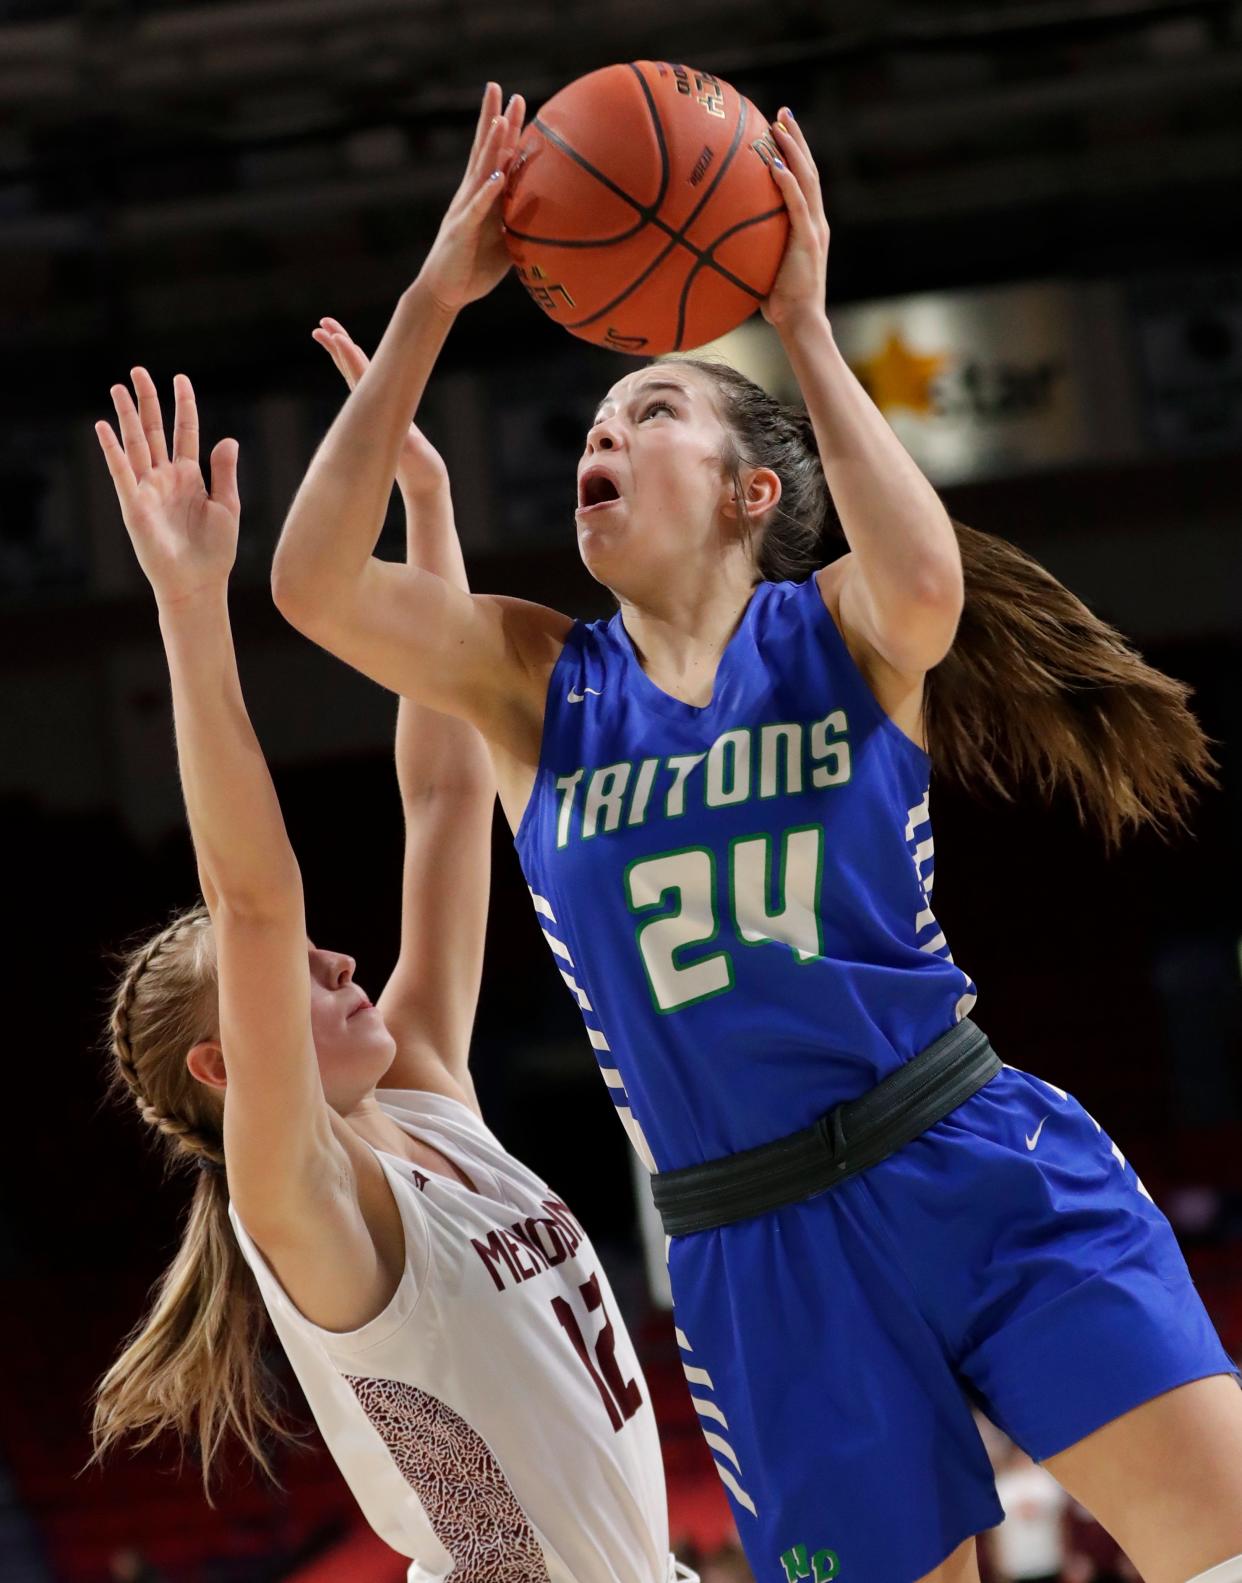 Green Bay Notre Dame senior Gracie Grzesk (24) is a top returning player for the Tritons and will play collegiately at the University of Wisconsin.